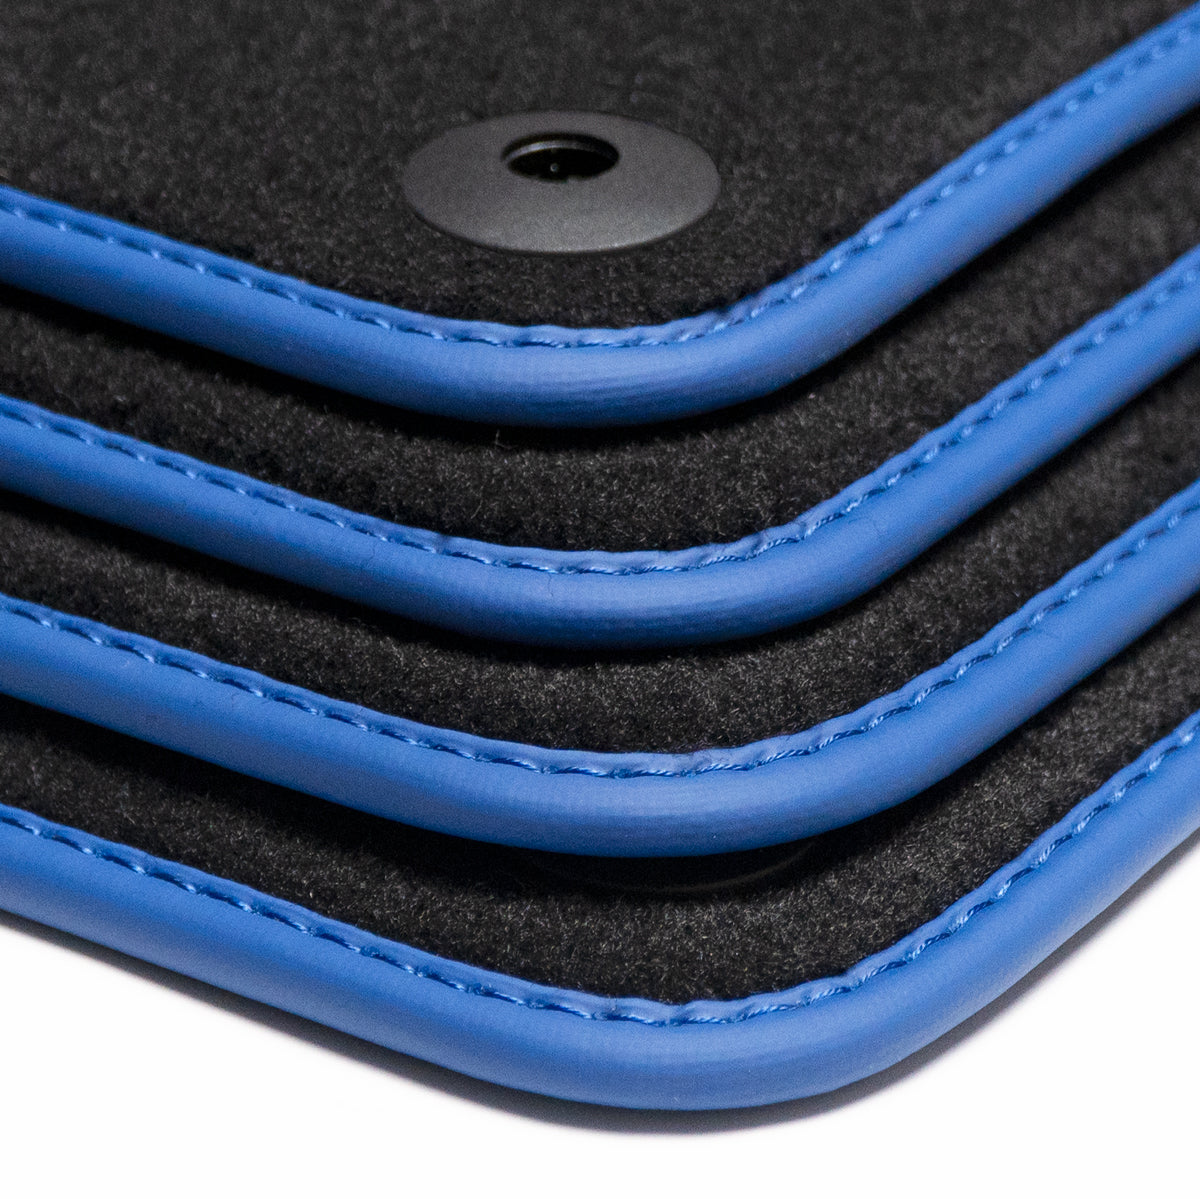 Volvo C70 Floor Mats - First Generation Coupe and Convertible - Blue Edging